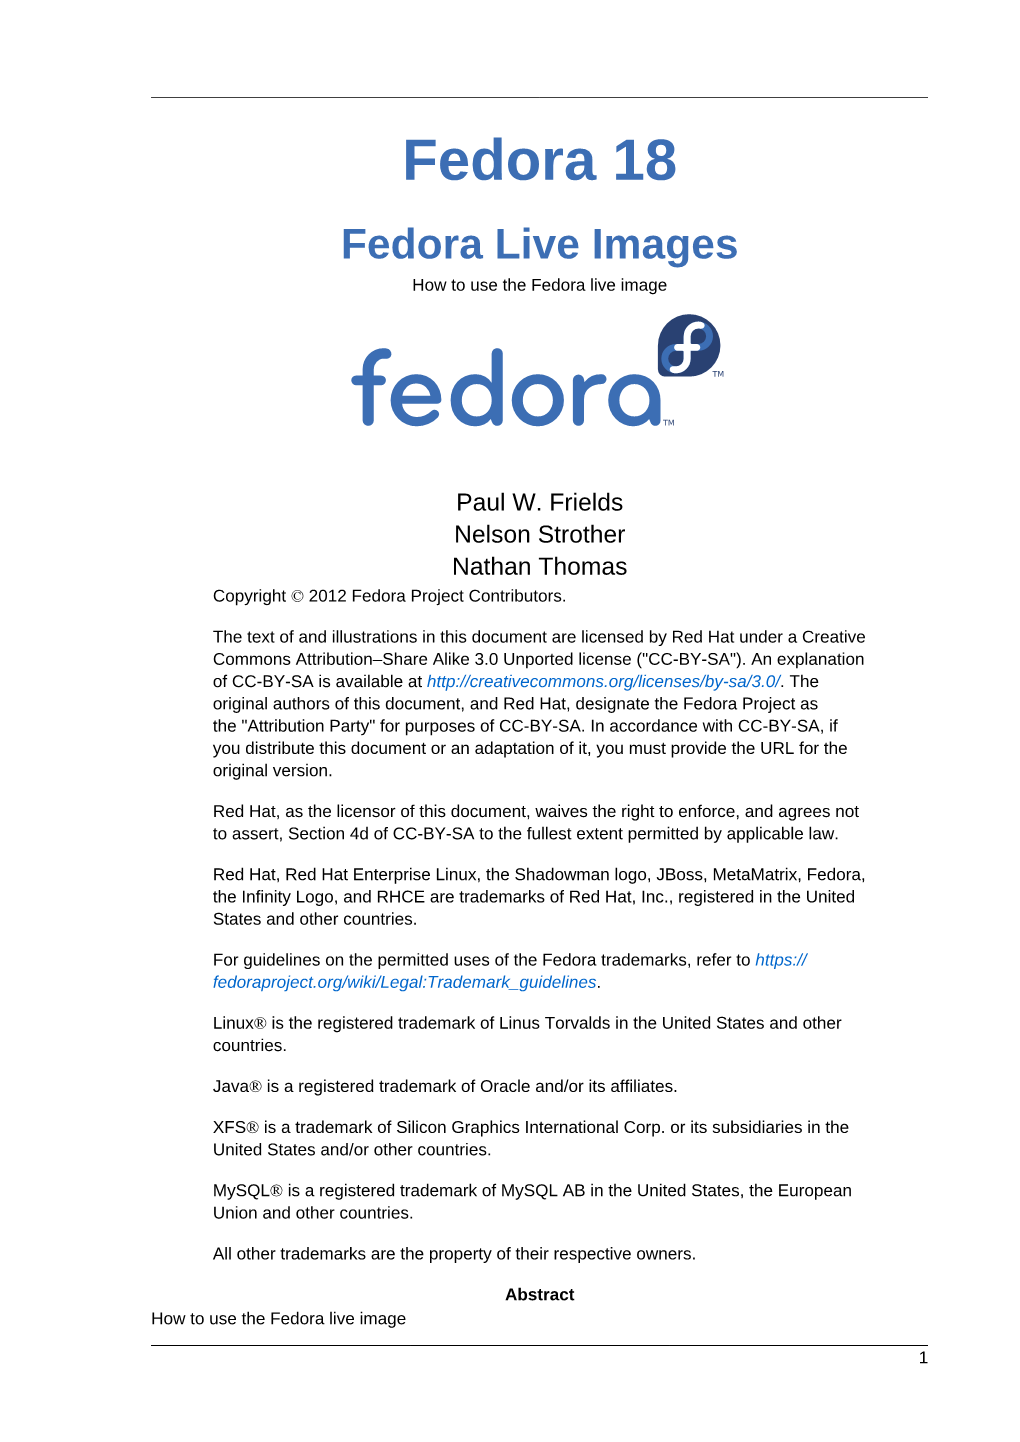 How to Use the Fedora Live Image